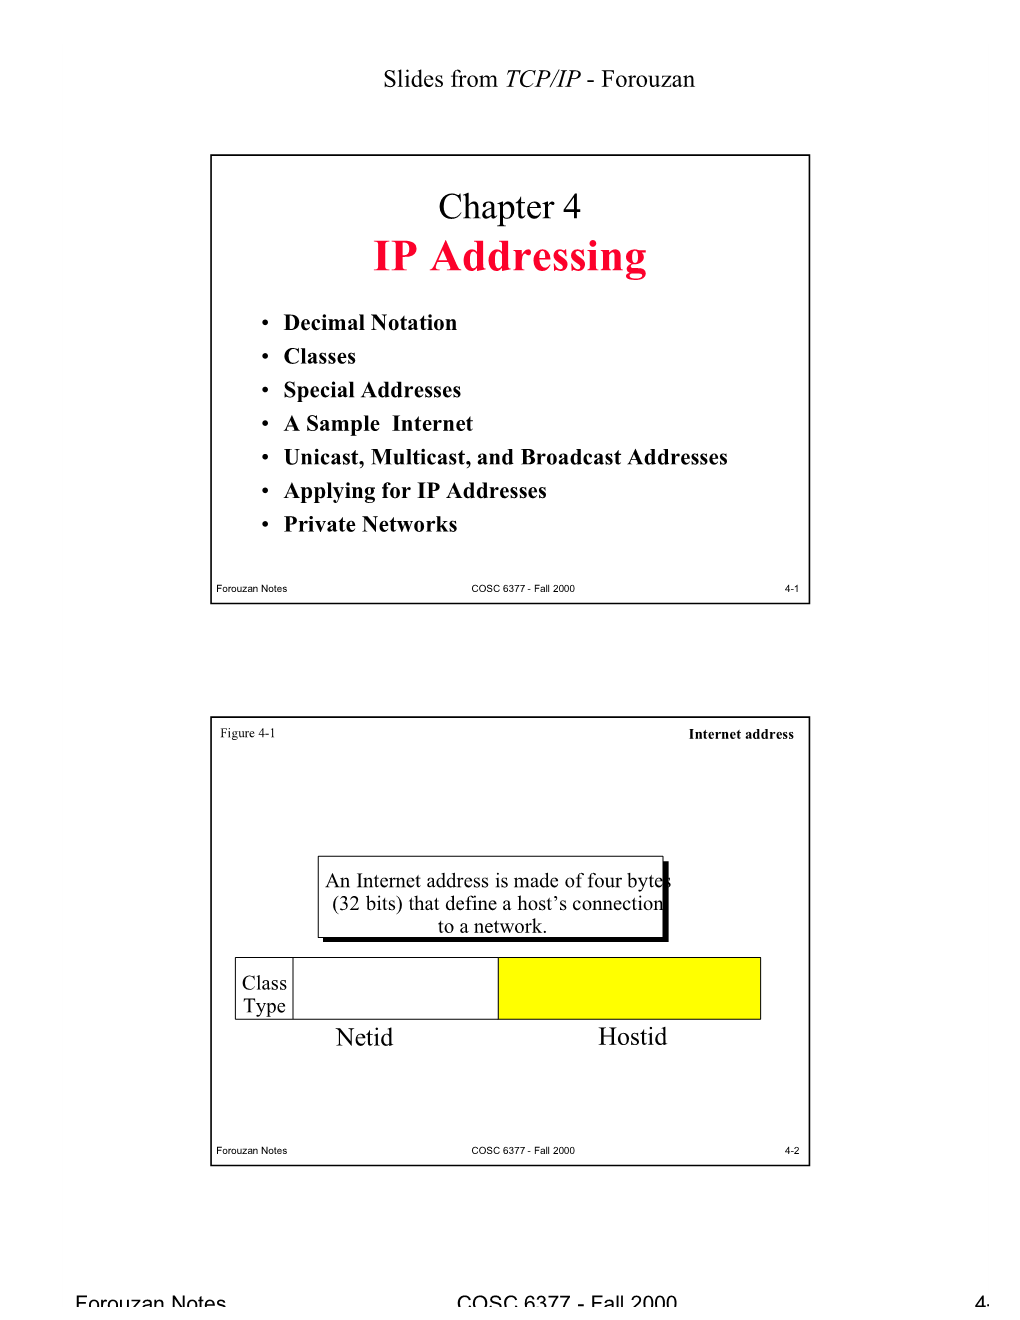 Chapter 4: IP Addressing